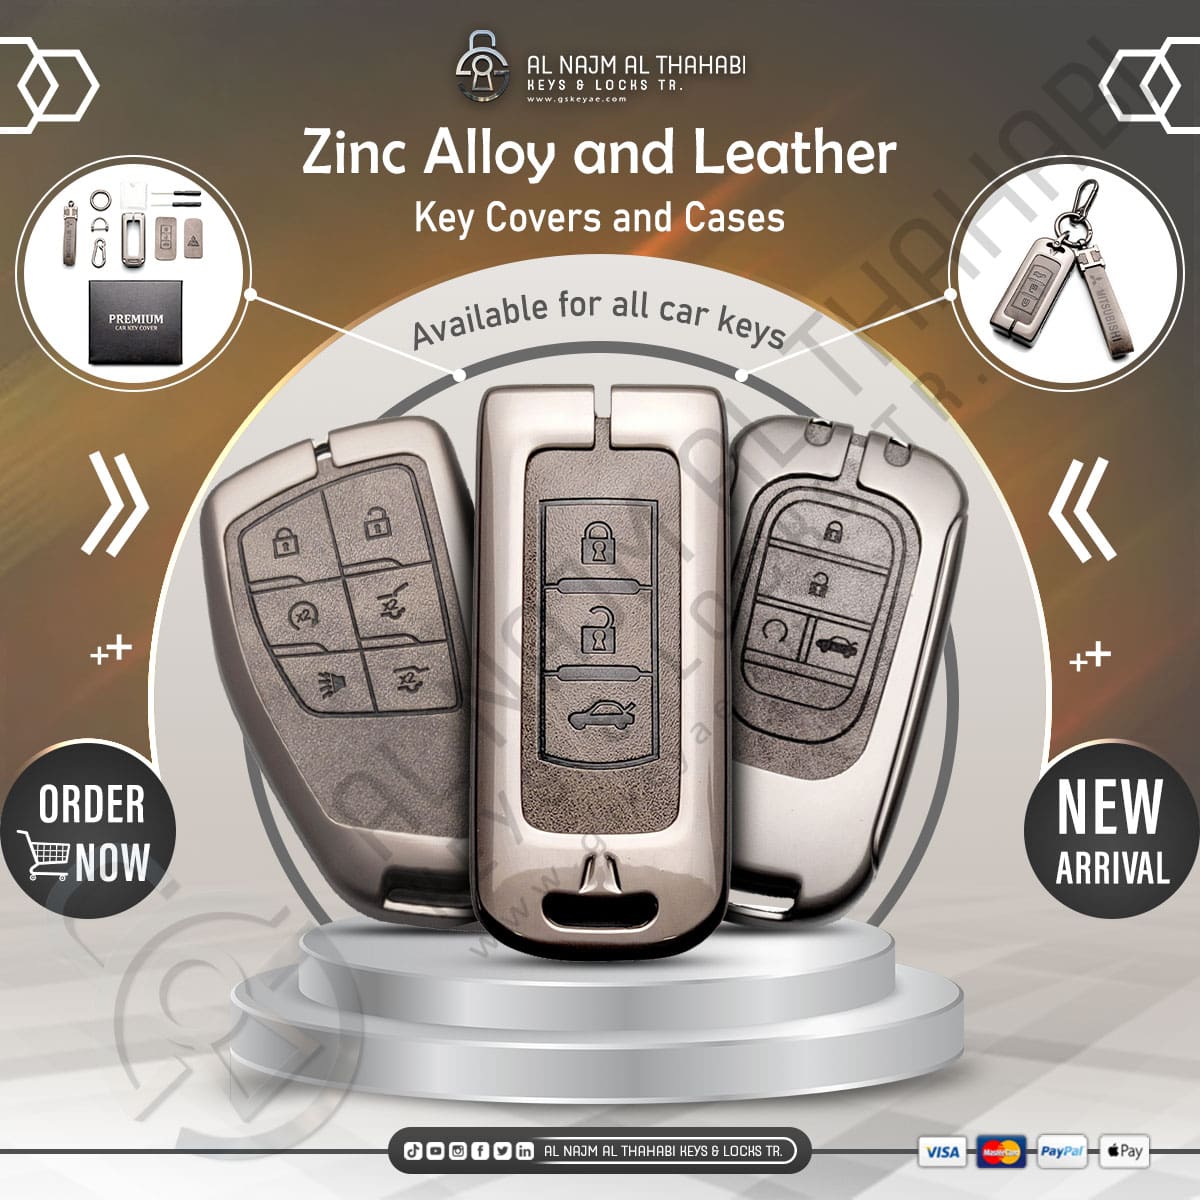 Zinc Alloy Key Covers and Cases